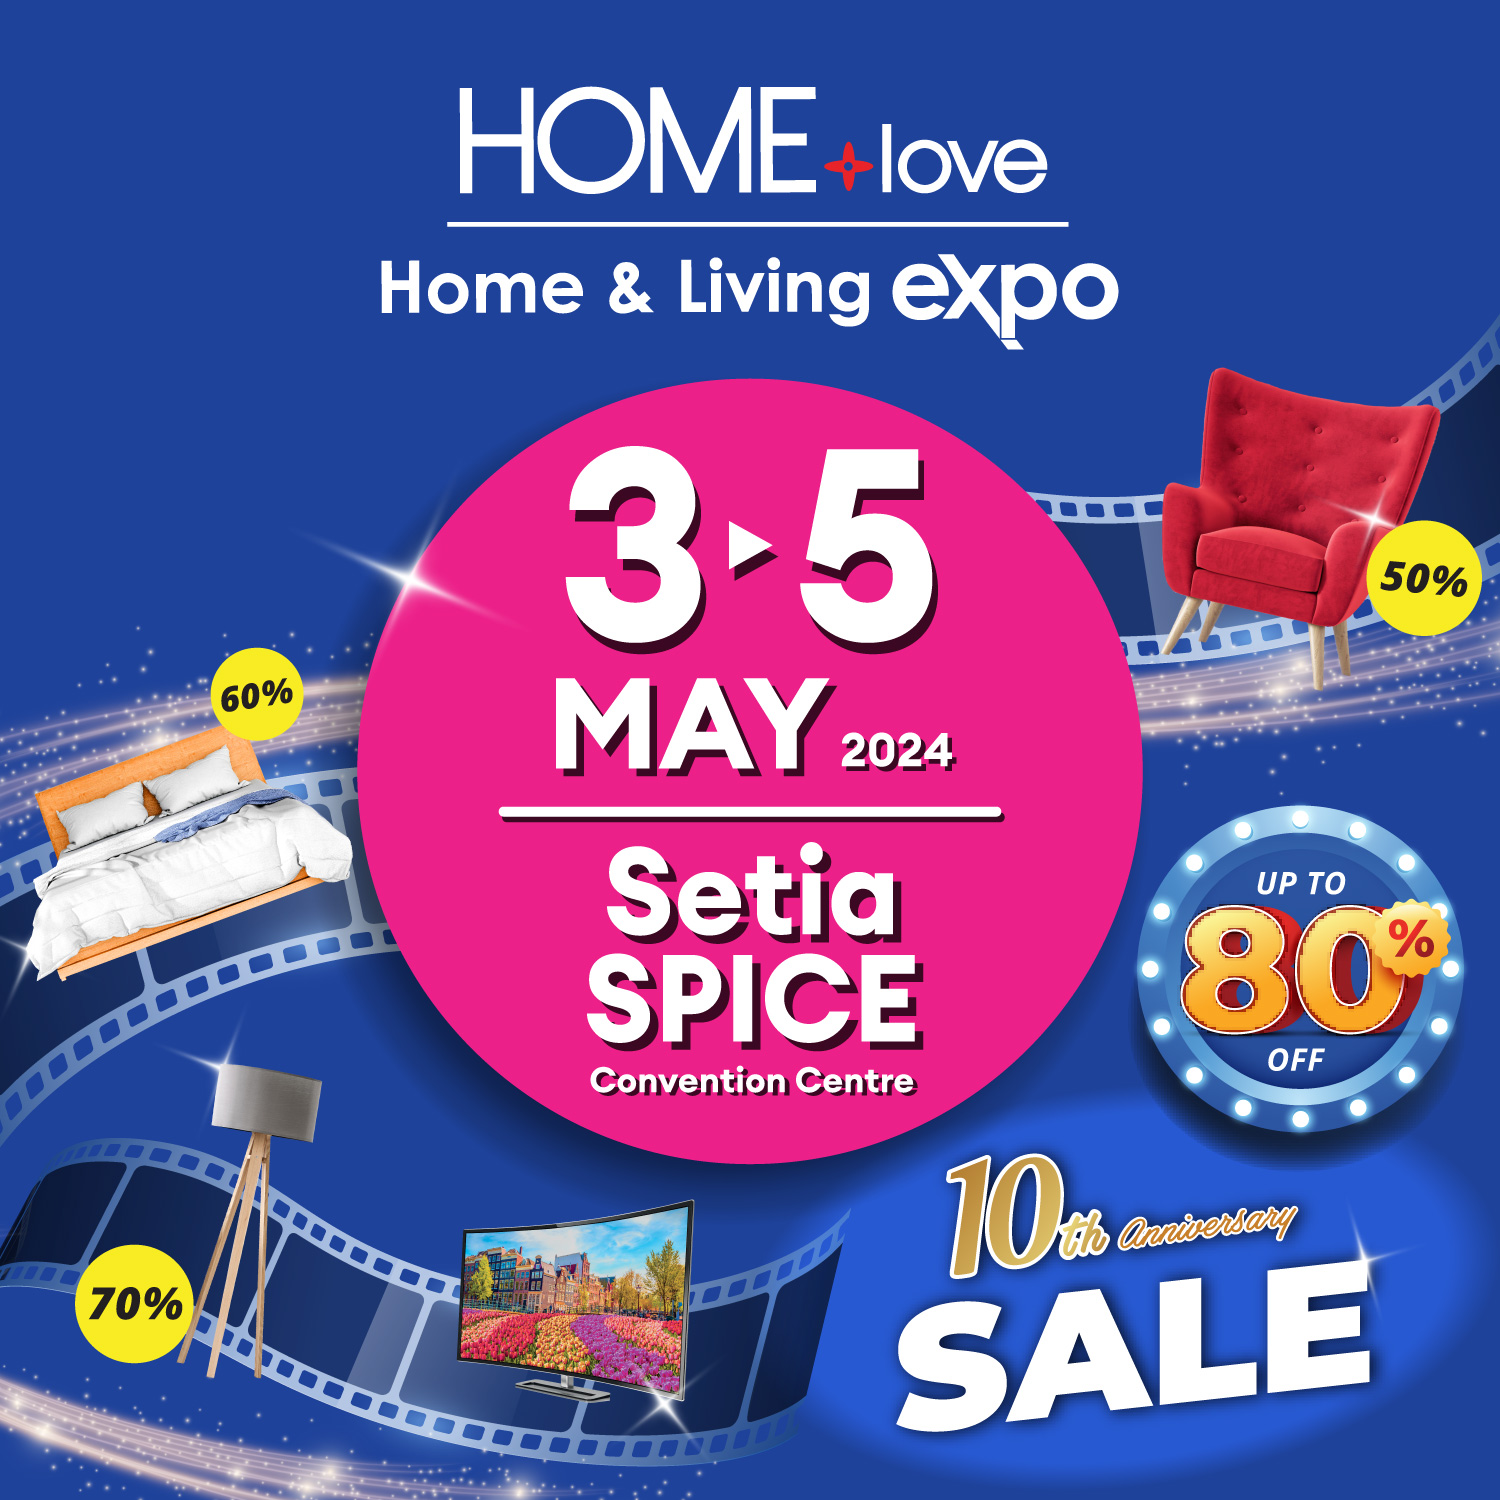 Homelove Home & Living Expo 2024